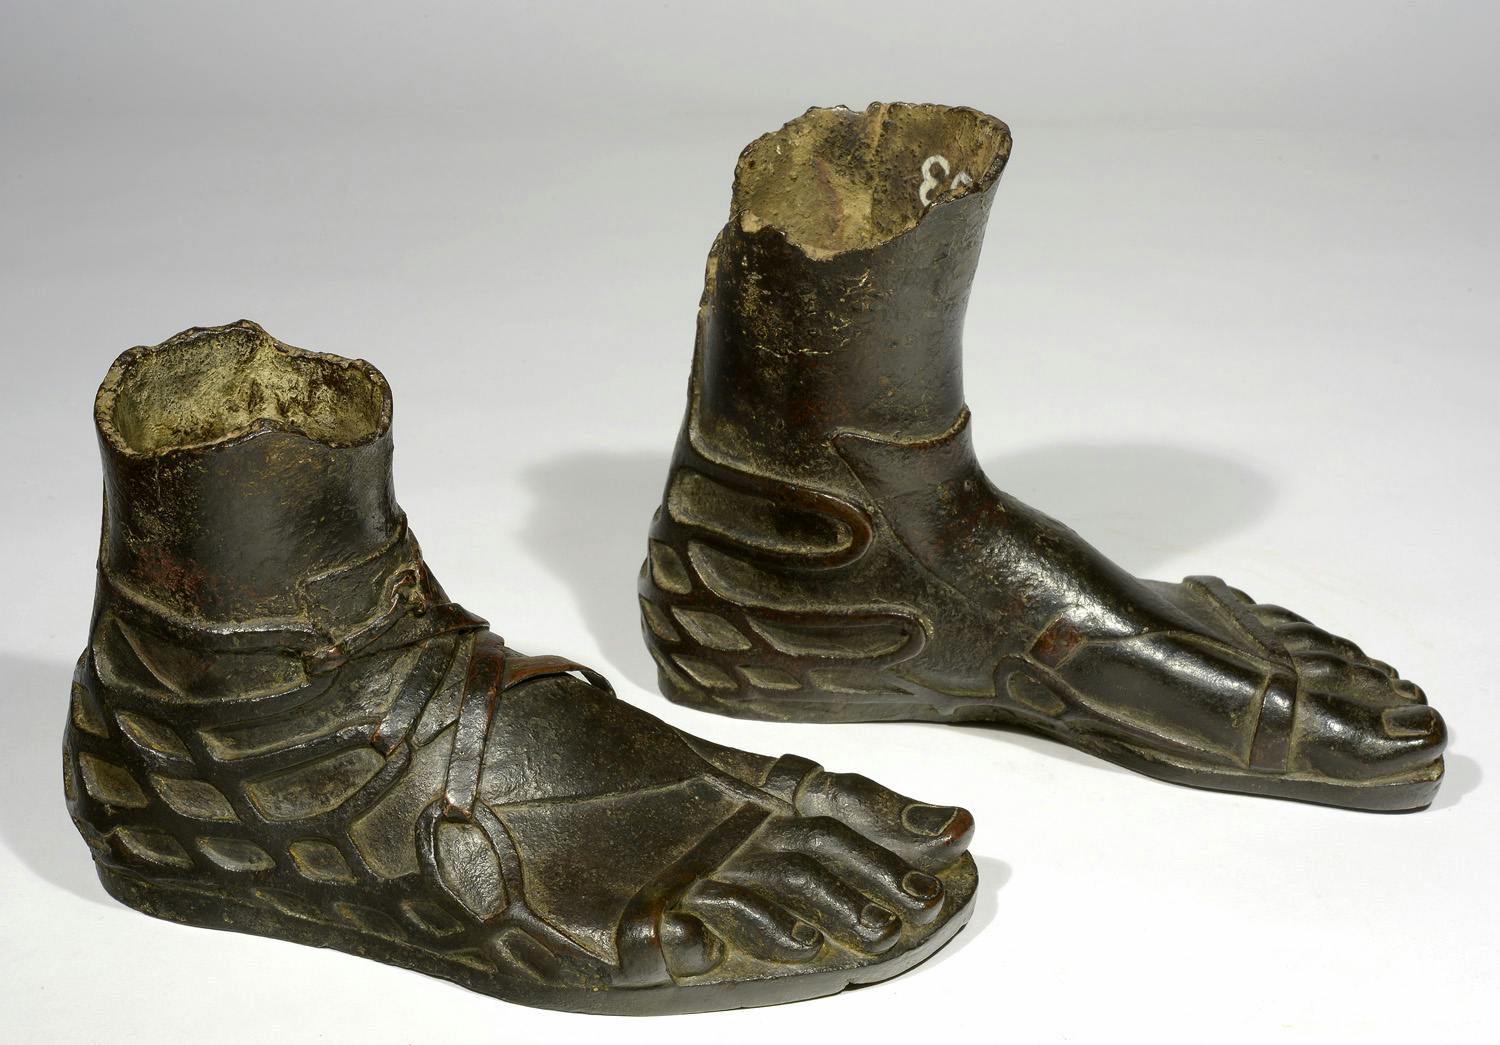 Worn by the Gods. The Art of shoemaking in the ancient world, the epic movie and contemporary fashion